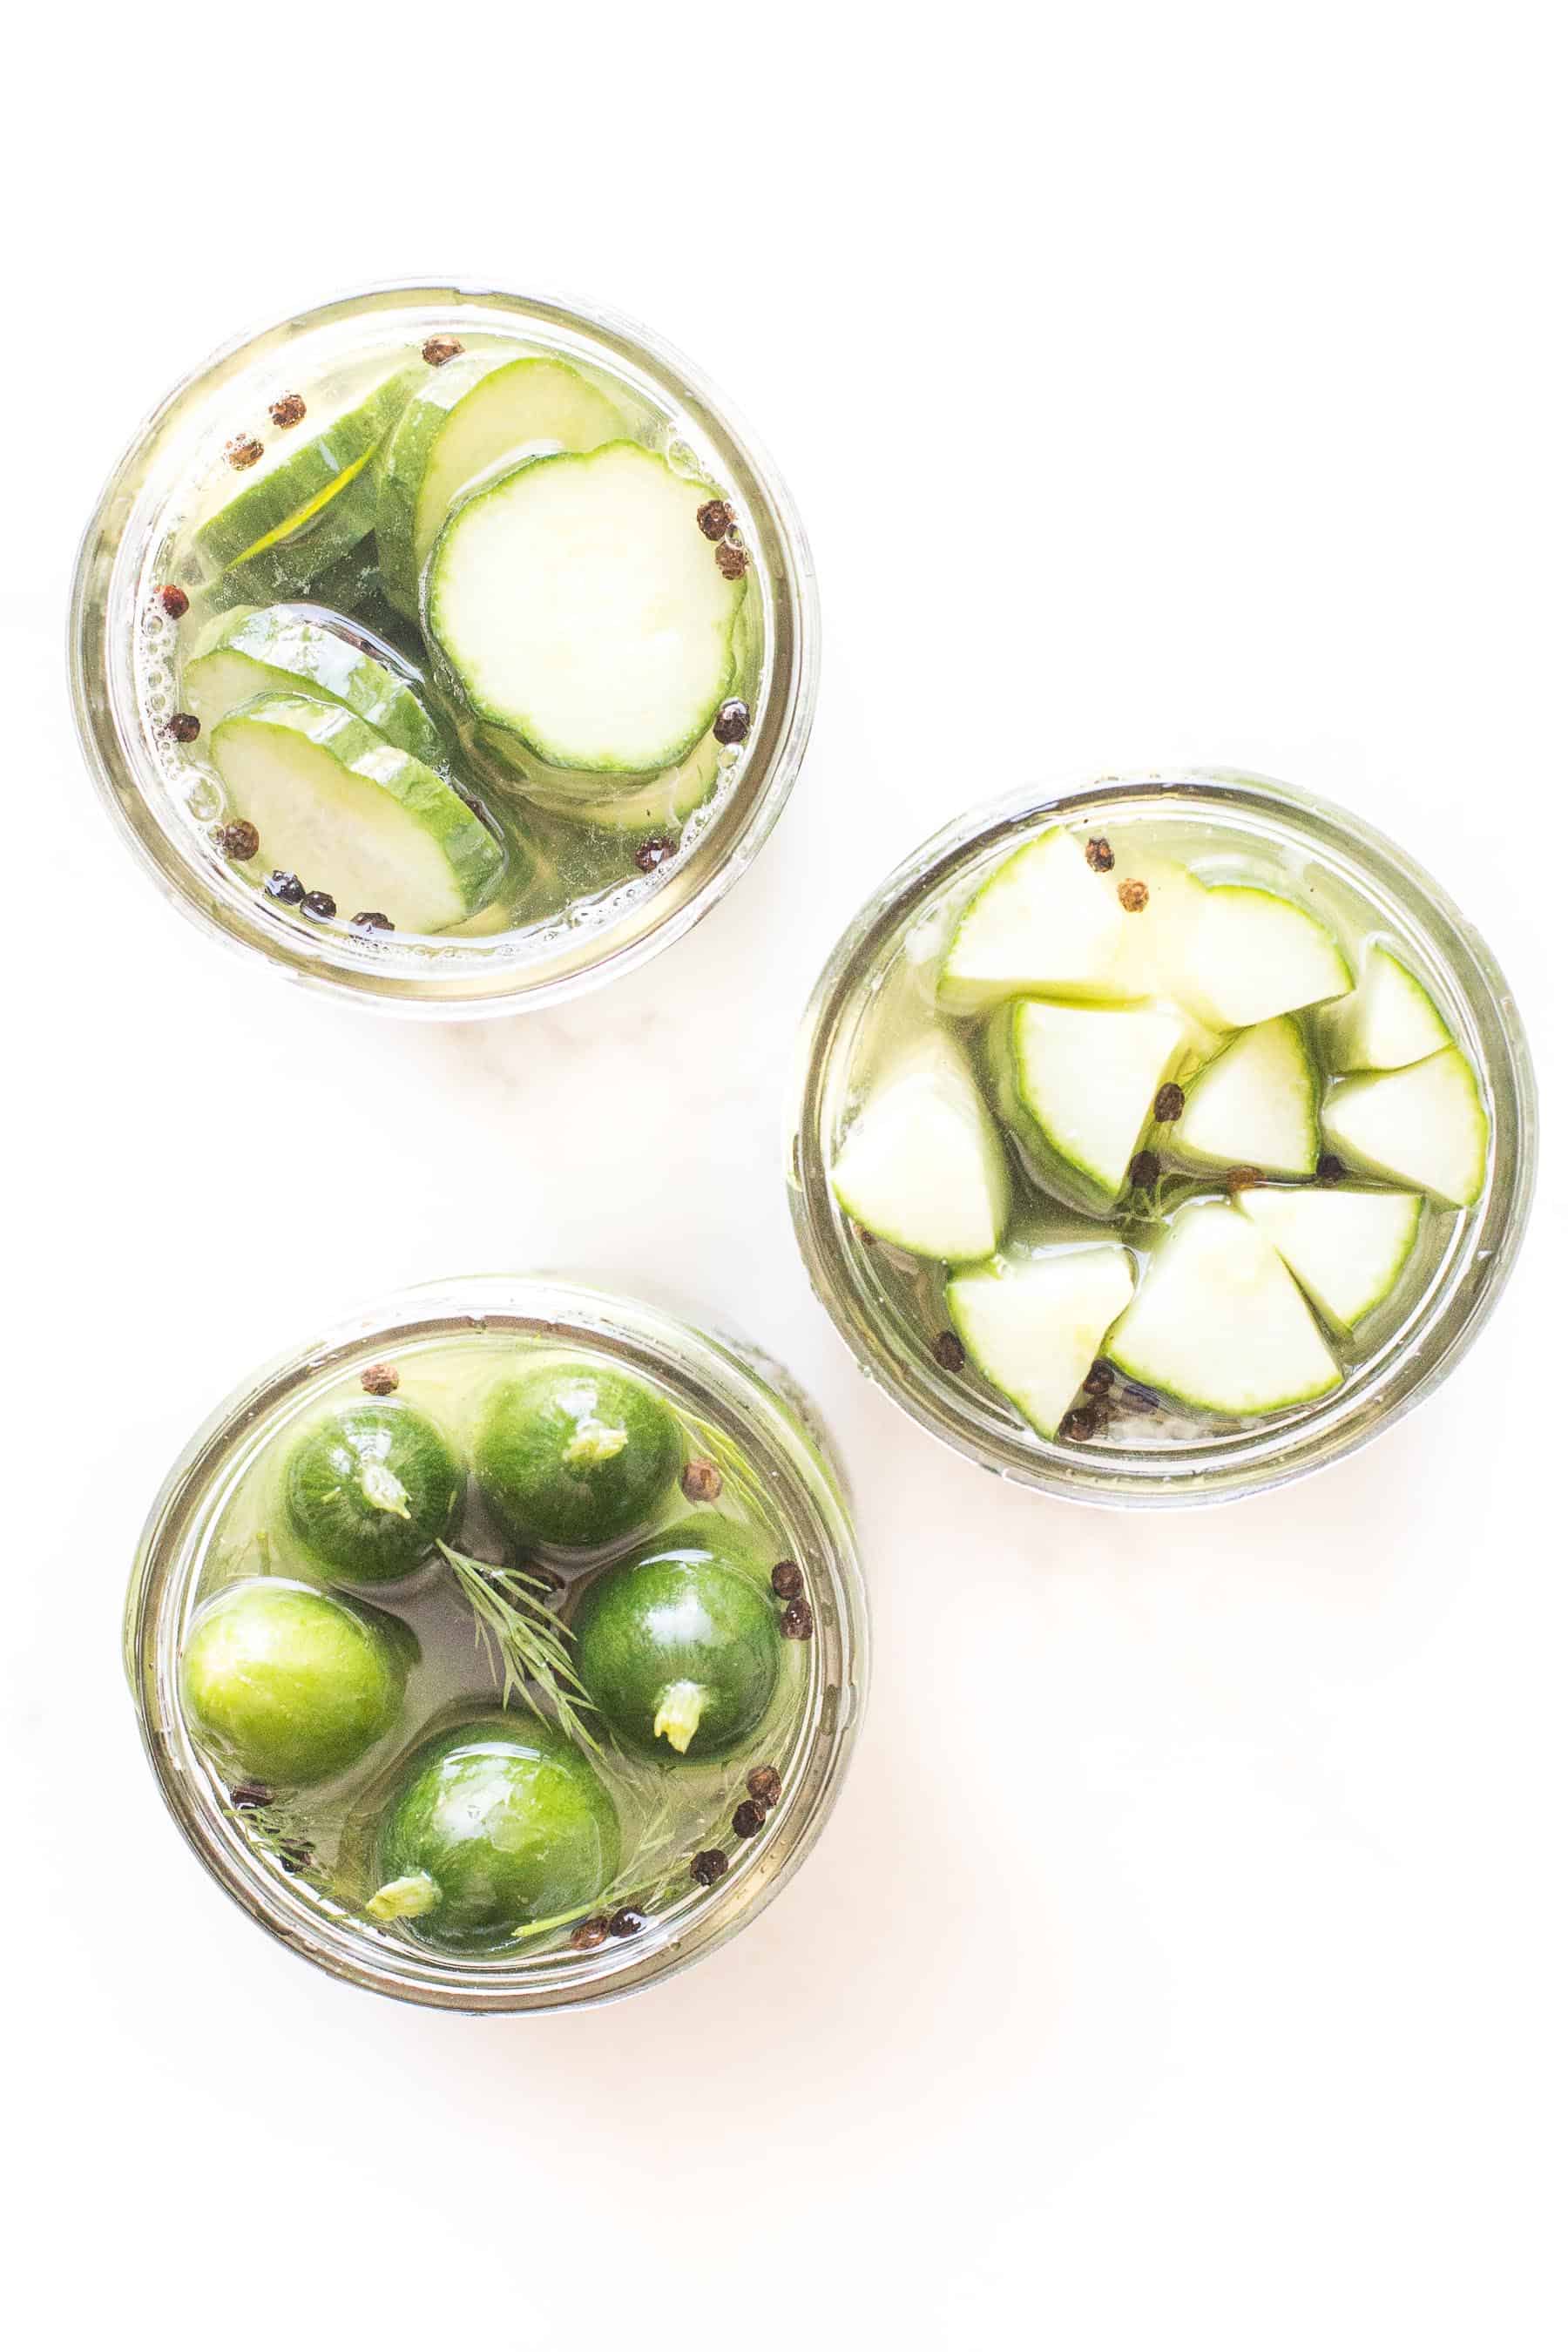 homemade pickles in mason jars on a white background